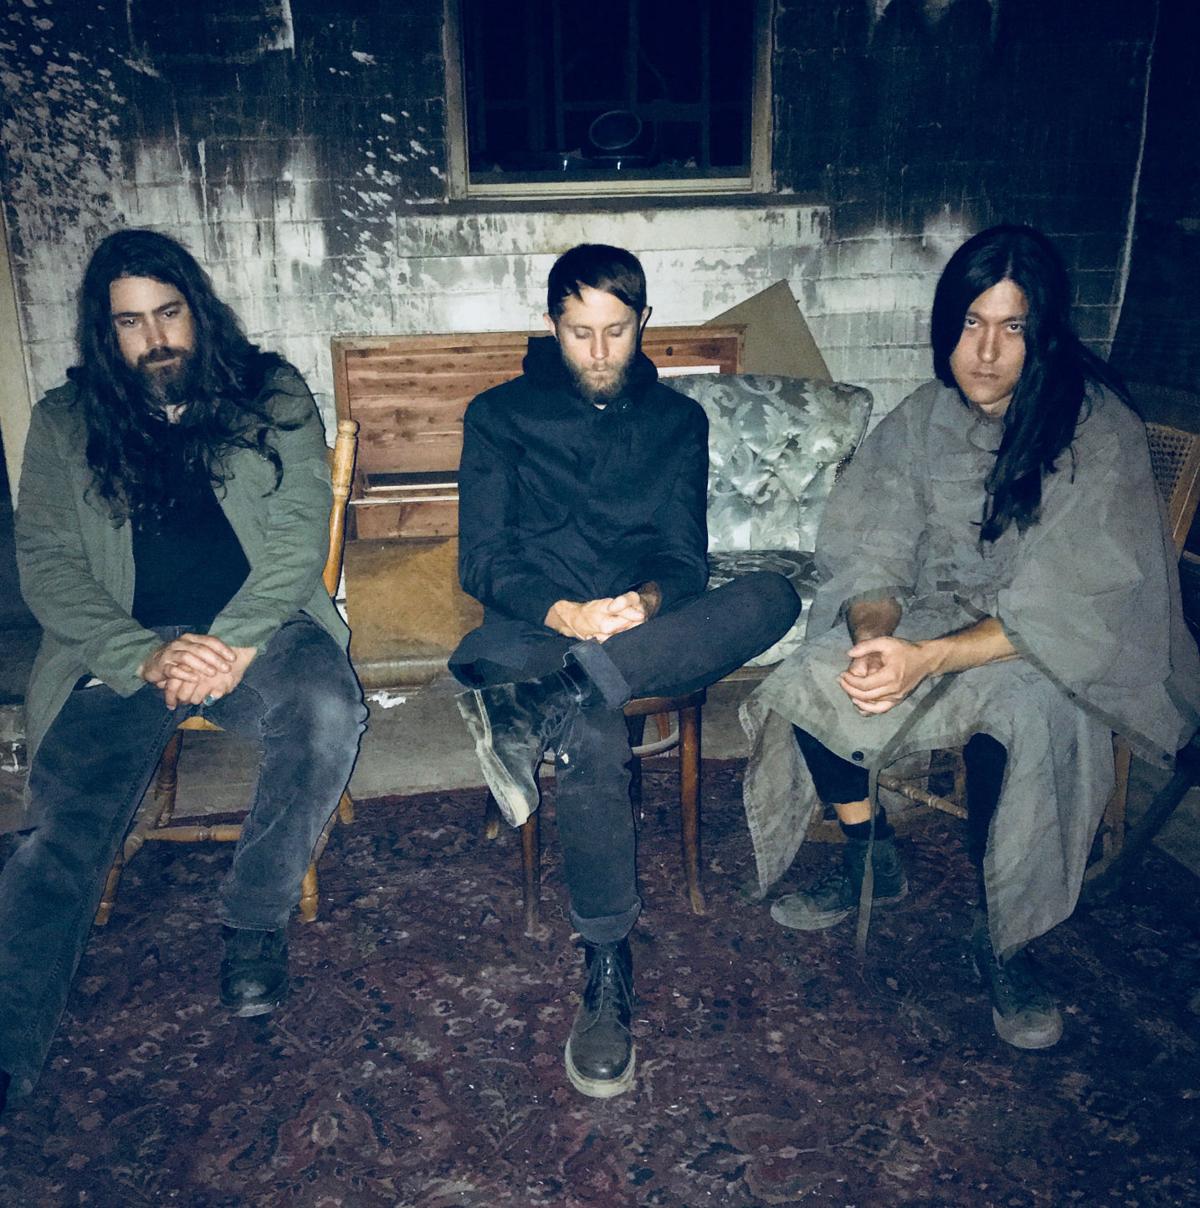 Noise rock band HEALTH talks new album, reality's 'lame, dystopian movie' ahead of BR show | Music | theadvocate.com